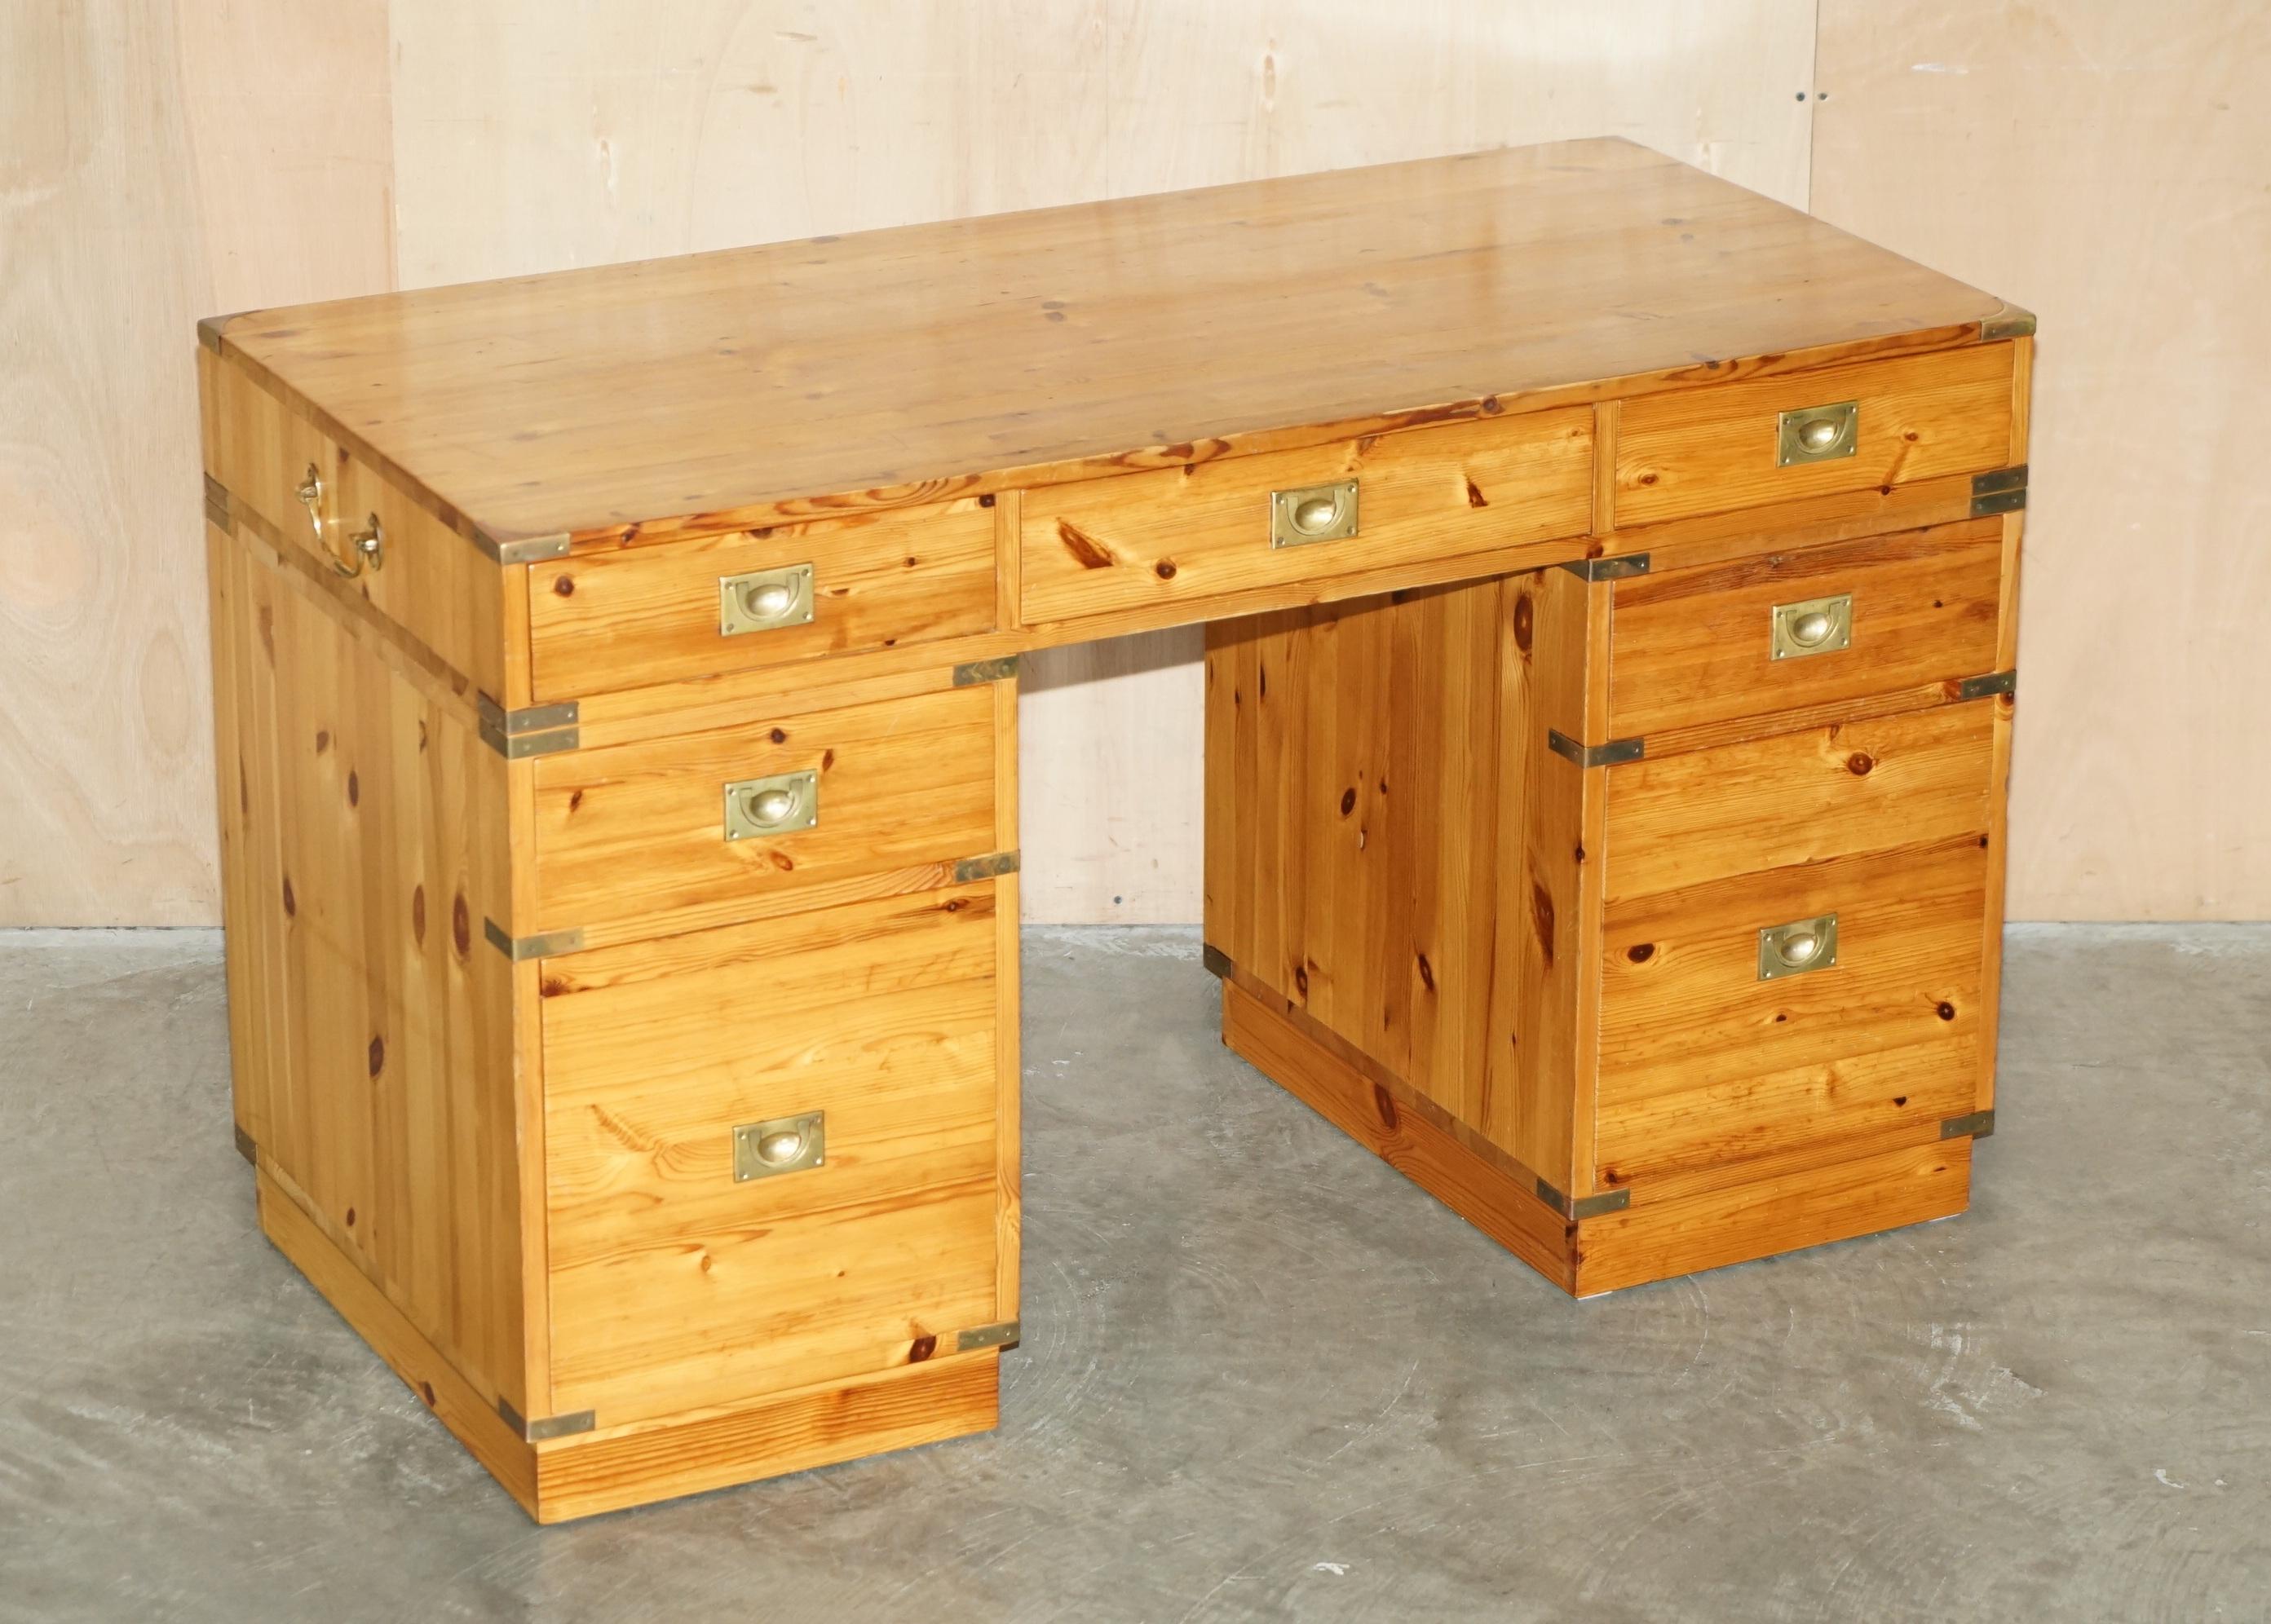 Royal House Antiques

Royal House Antiques is delighted to offer for sale this lovely hand made in England Military Campaign style twin pedestal desk in pine with brass fittings 

Please note the delivery fee listed is just a guide, it covers within